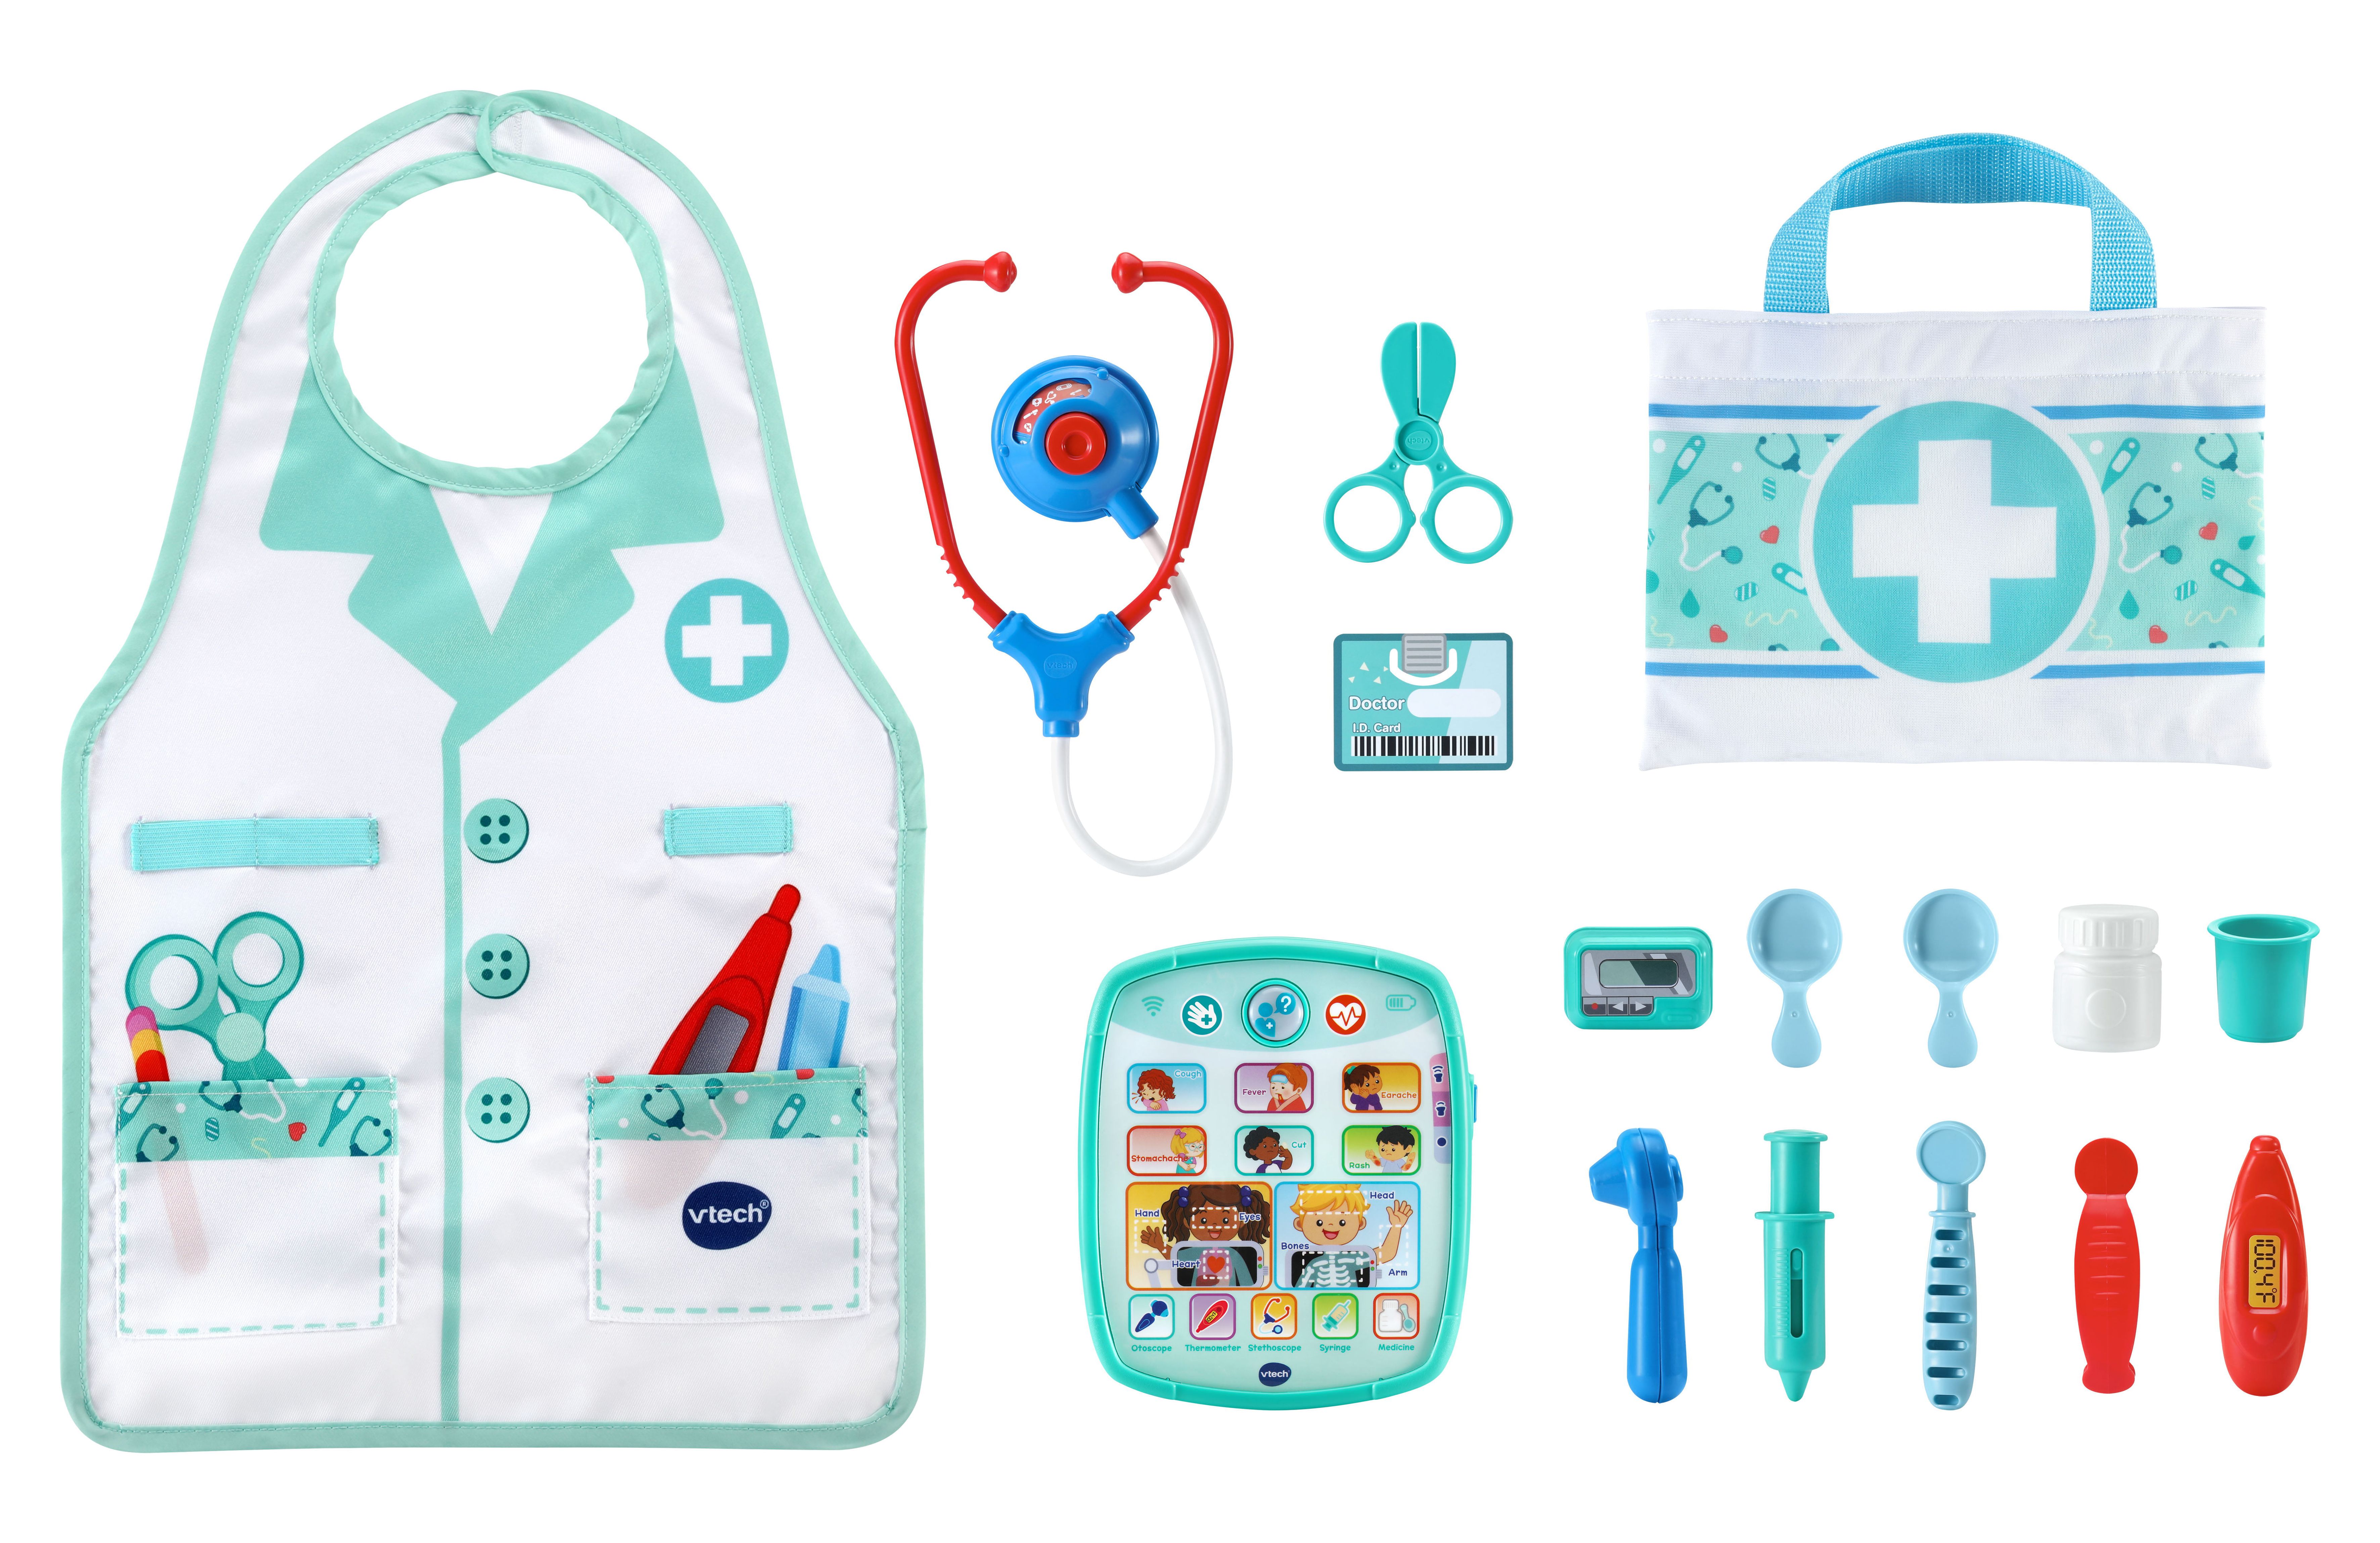 VTech® Smart Chart Medical Kit™ With Healthcare Tablet and Accessories - image 5 of 9